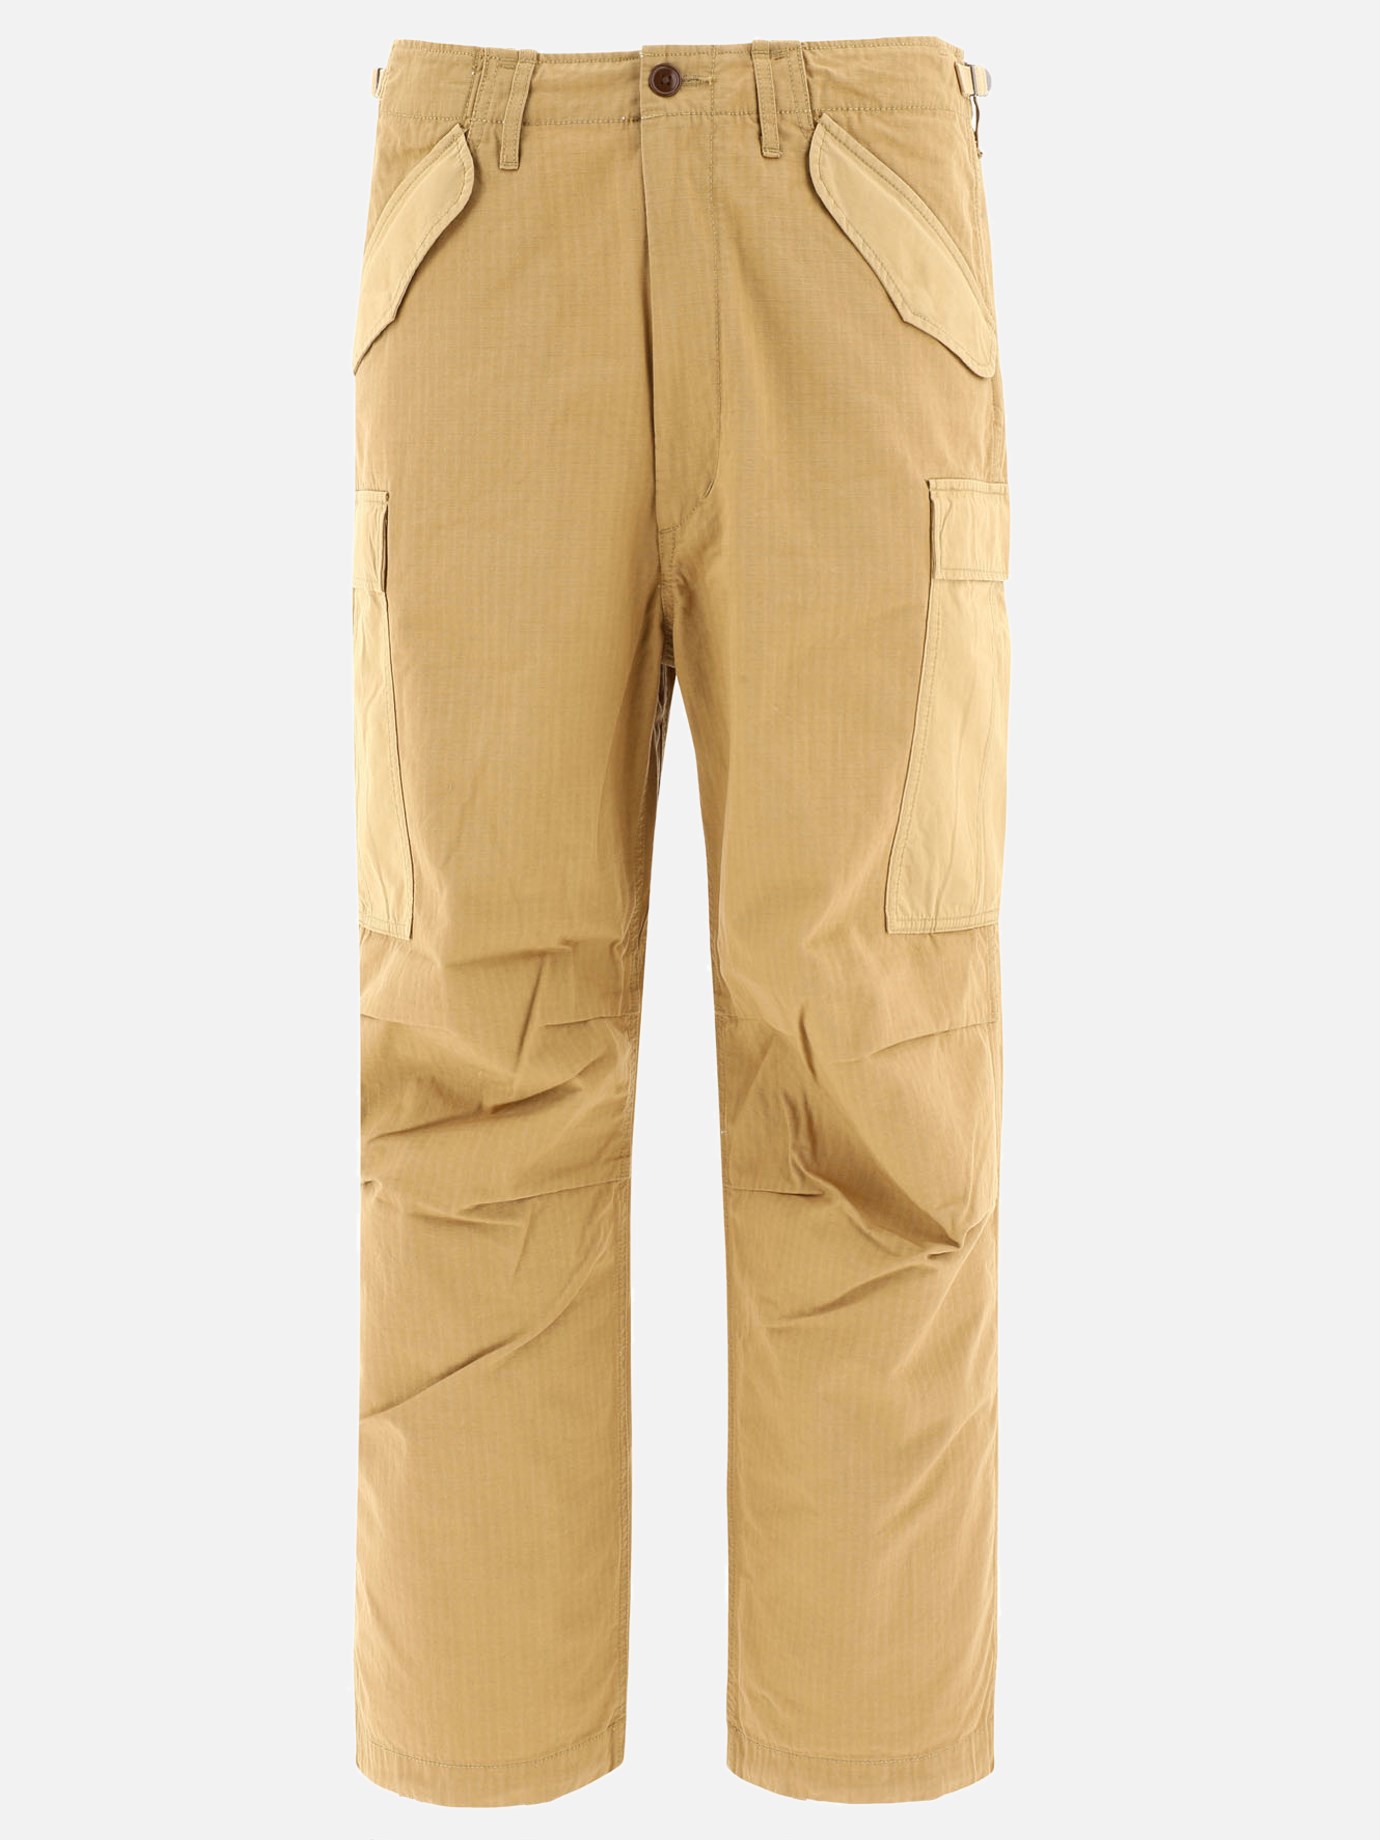 Cargo trousers with drawstringby Nanamica - 1